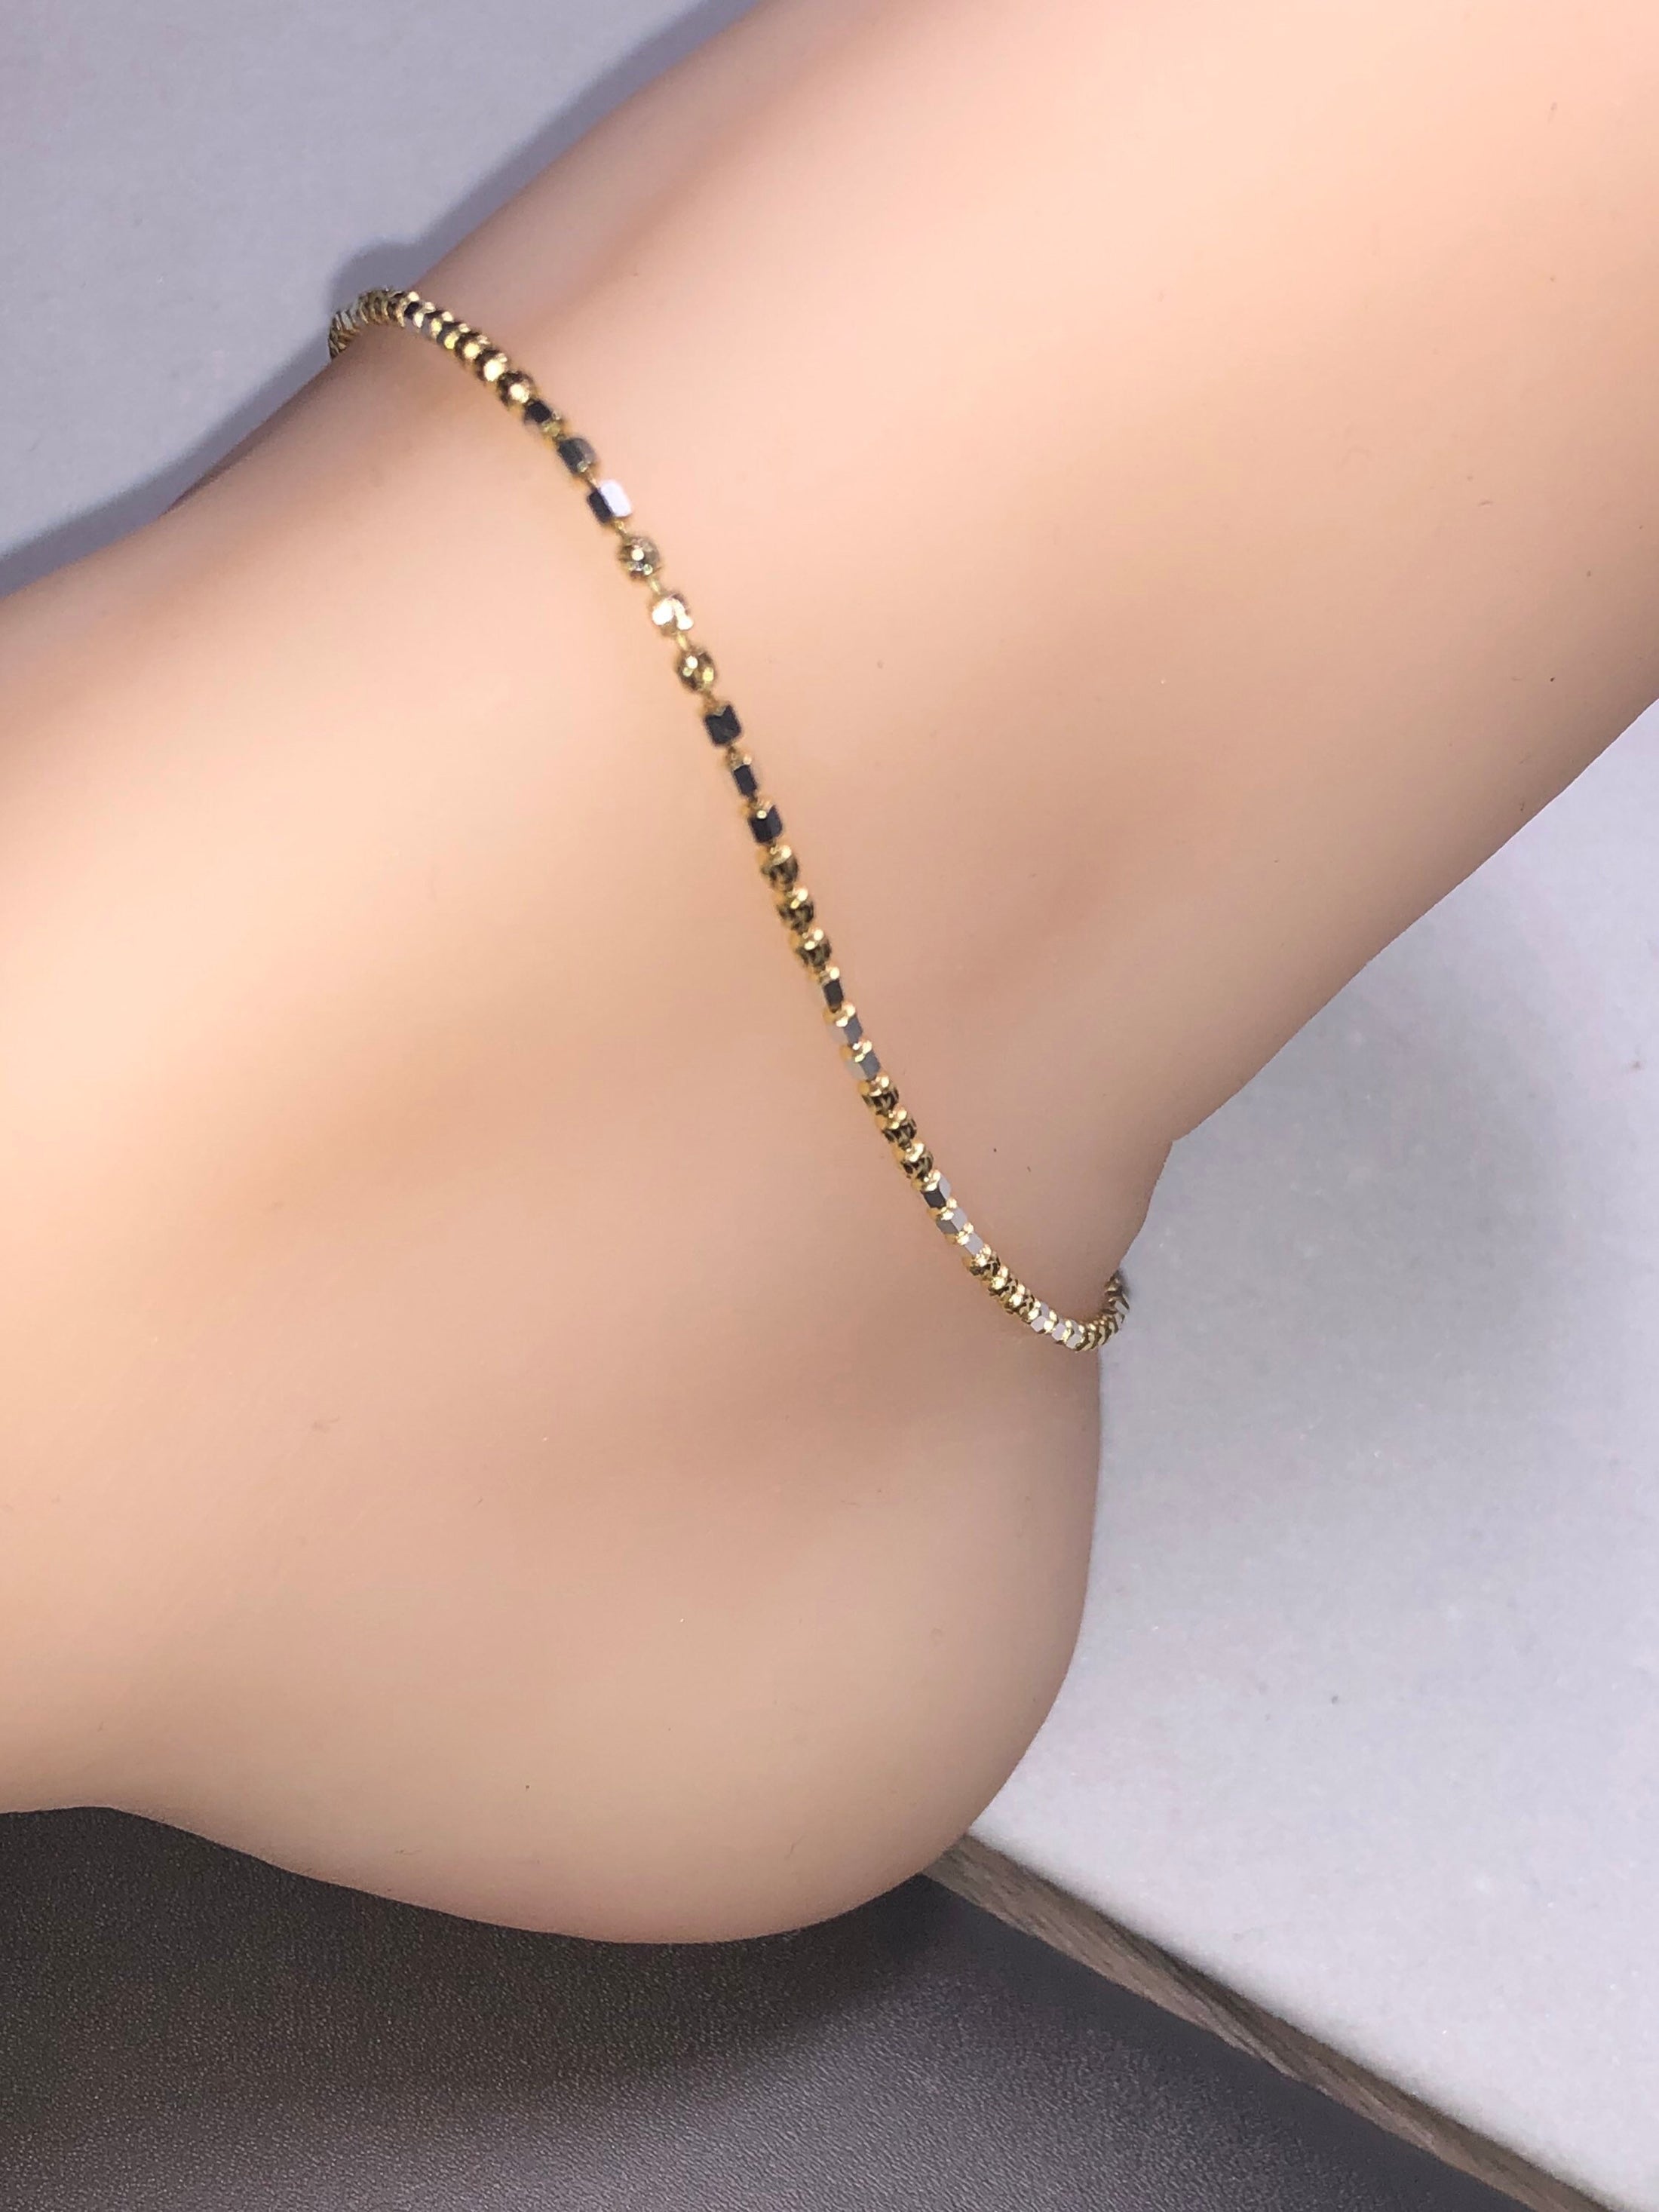 14k gold vermeil two tone diamond cut stunning anklet one of our bestselling most loved by women best gift for women free gift box free ship